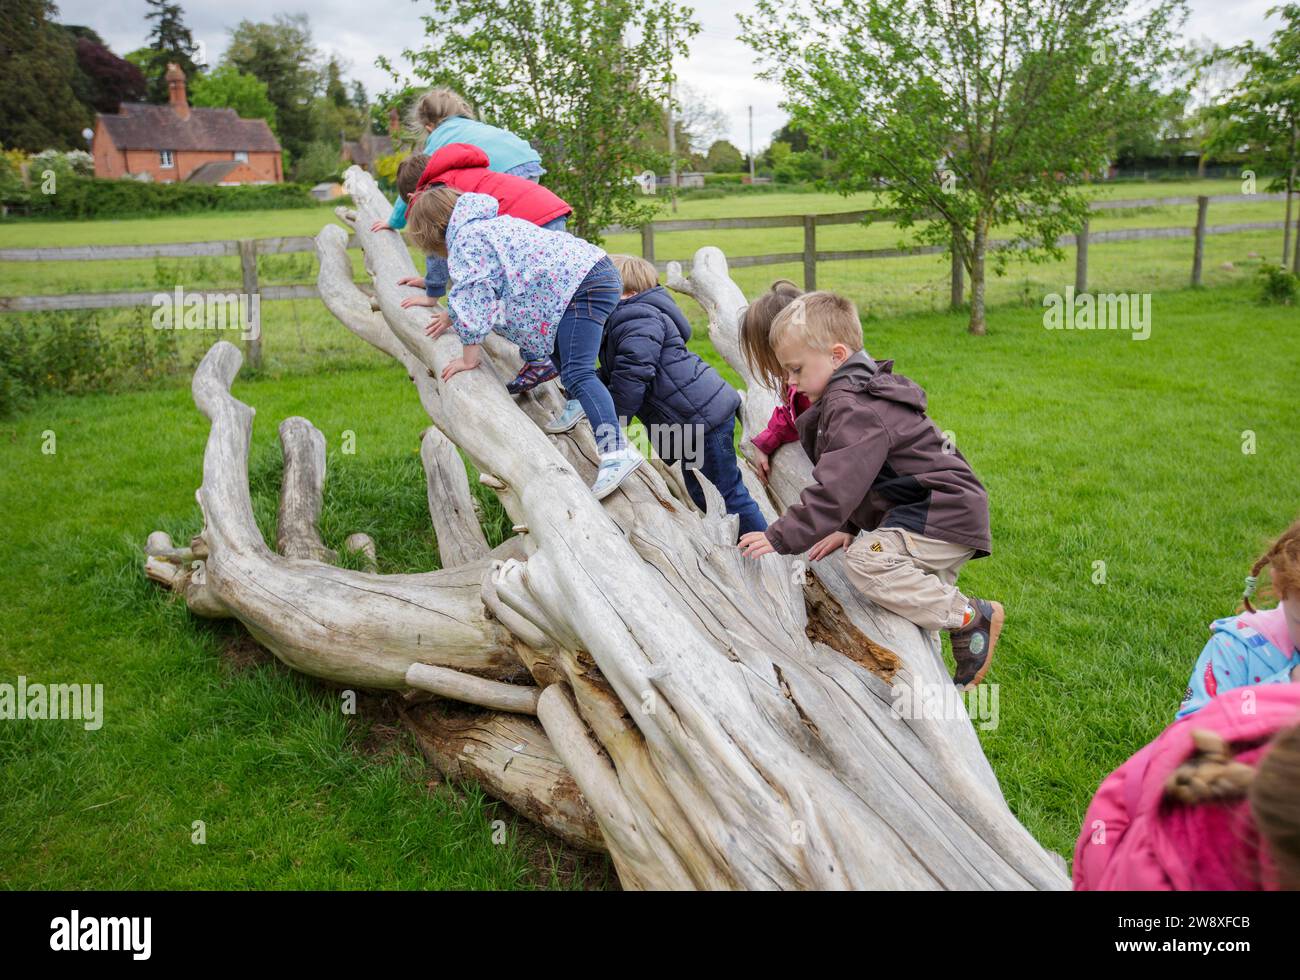 Children playing on a tree trunk in the grounds of an early years centre in the UK Stock Photo